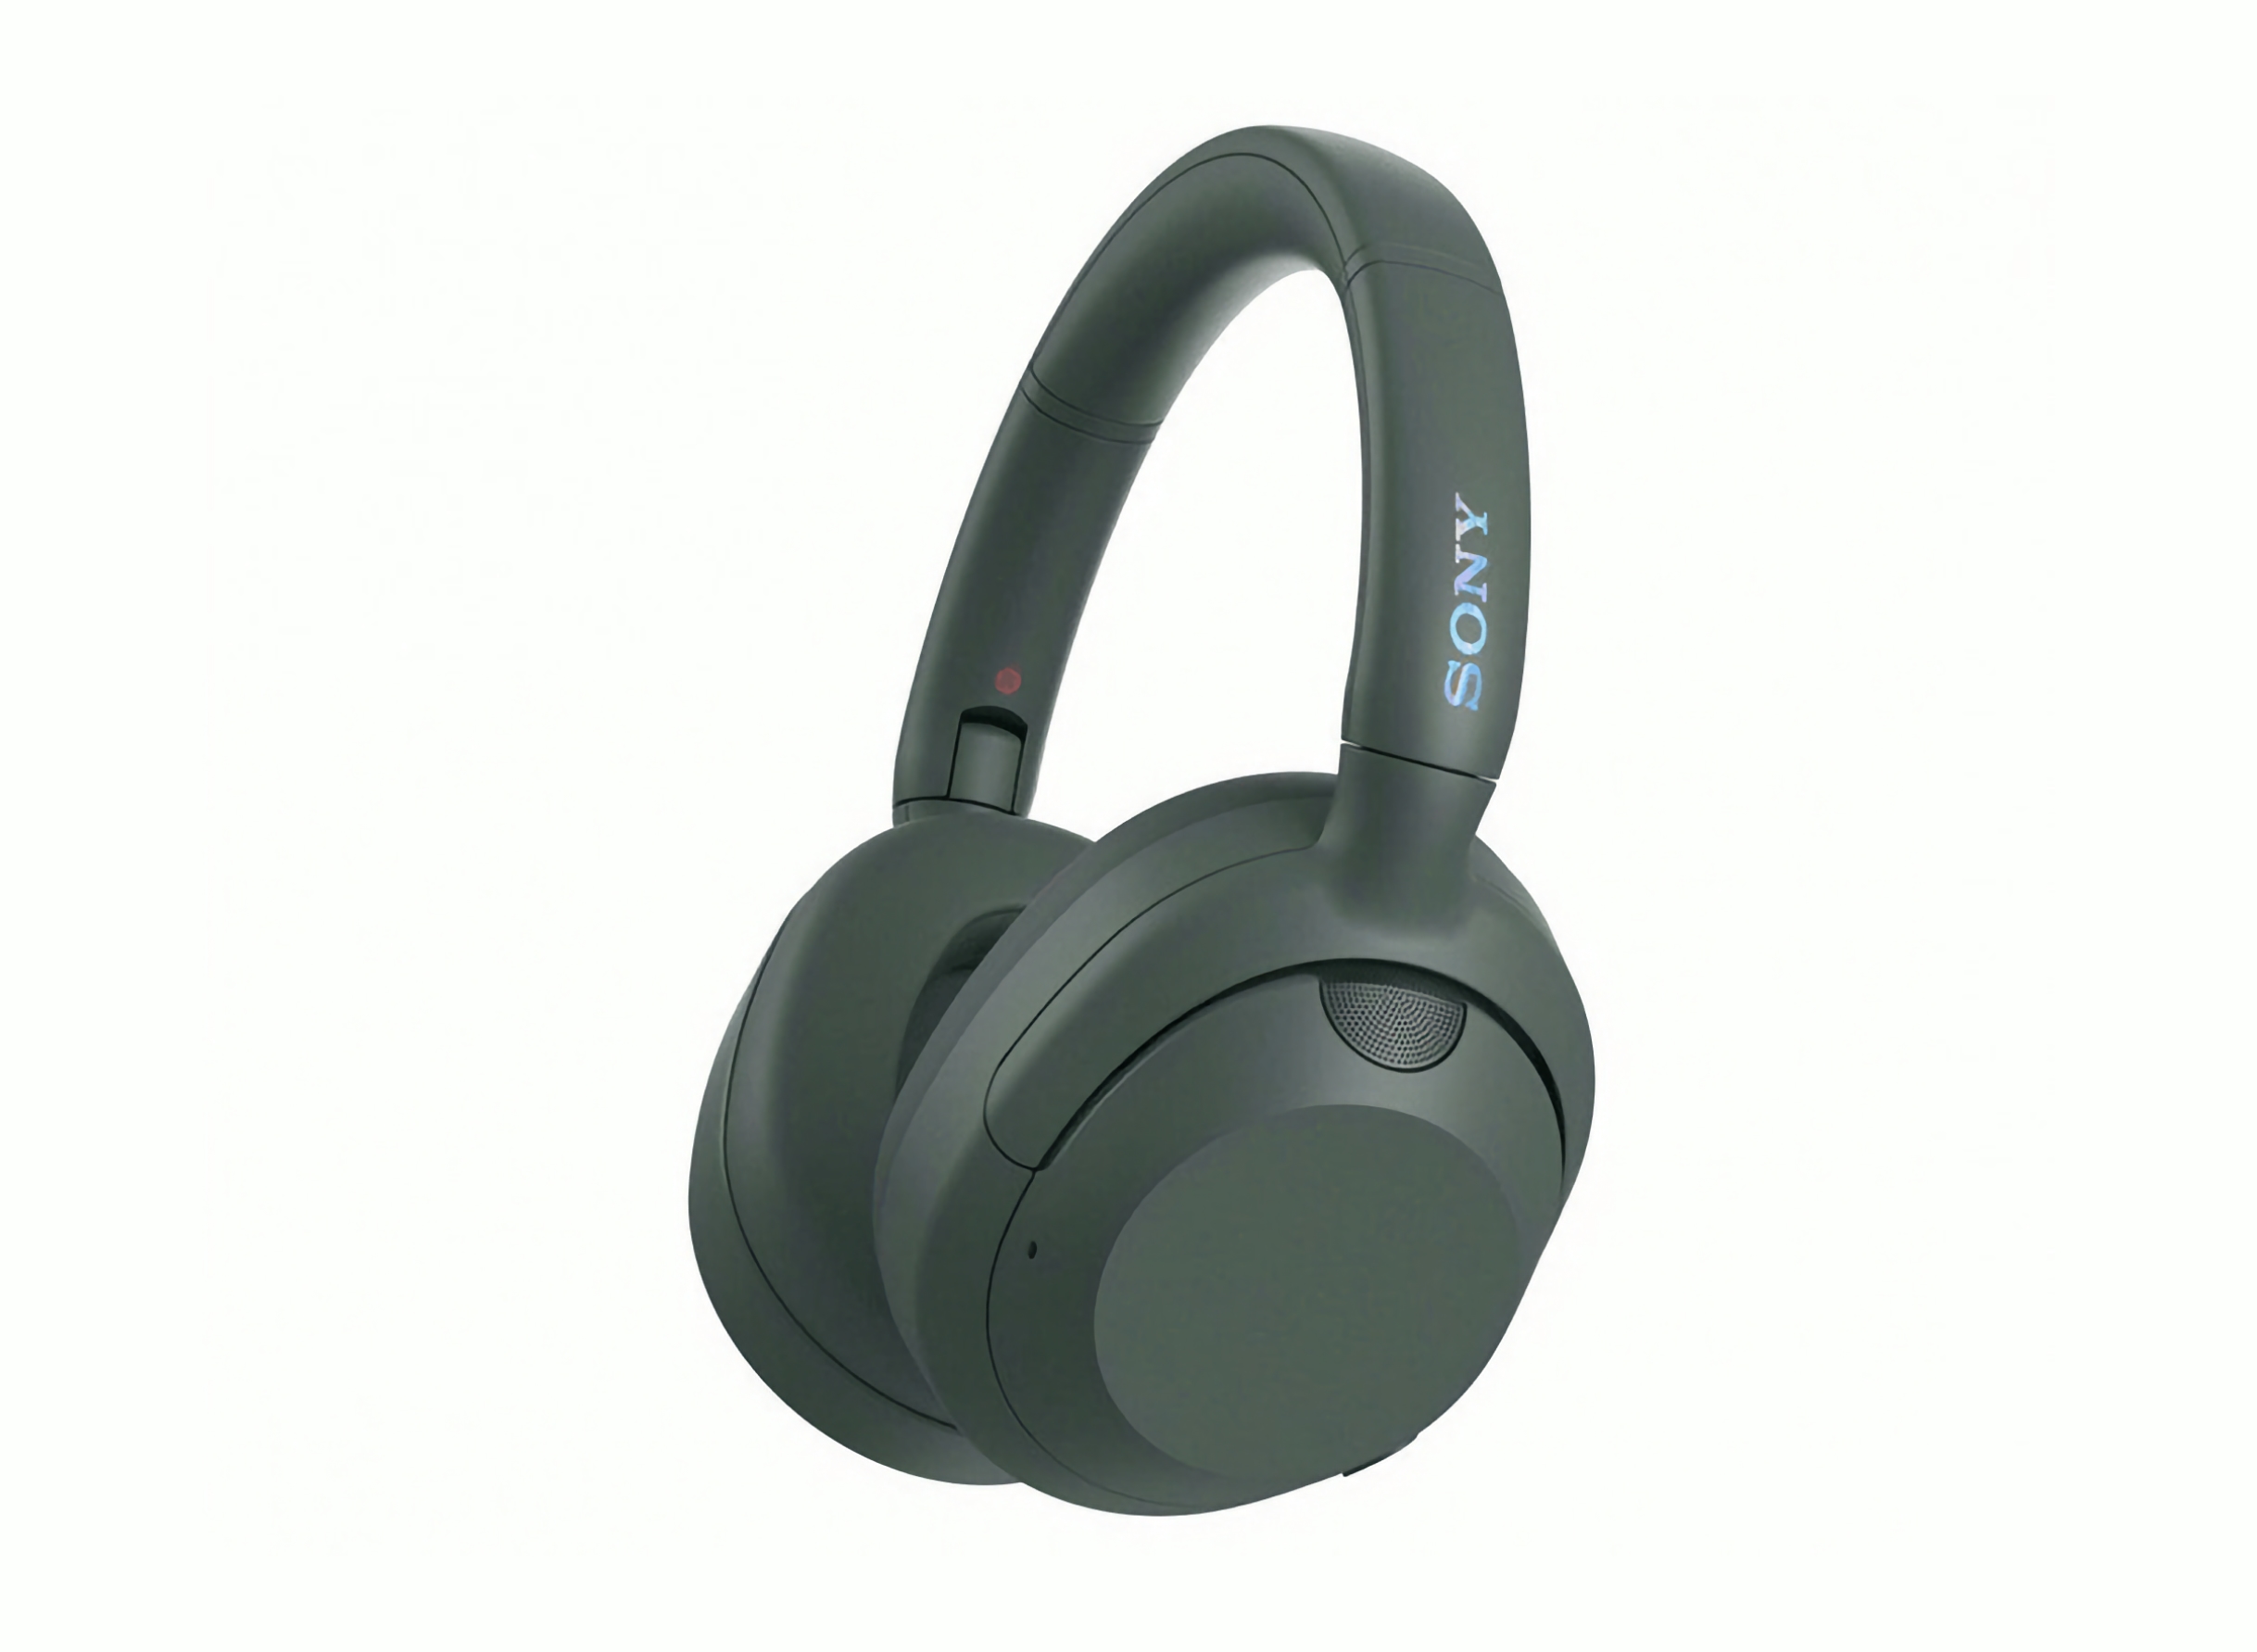 Sony is preparing to release WH-ULT900N wireless headphones with ANC, Bluetooth 5.2 and up to 50 hours of battery life